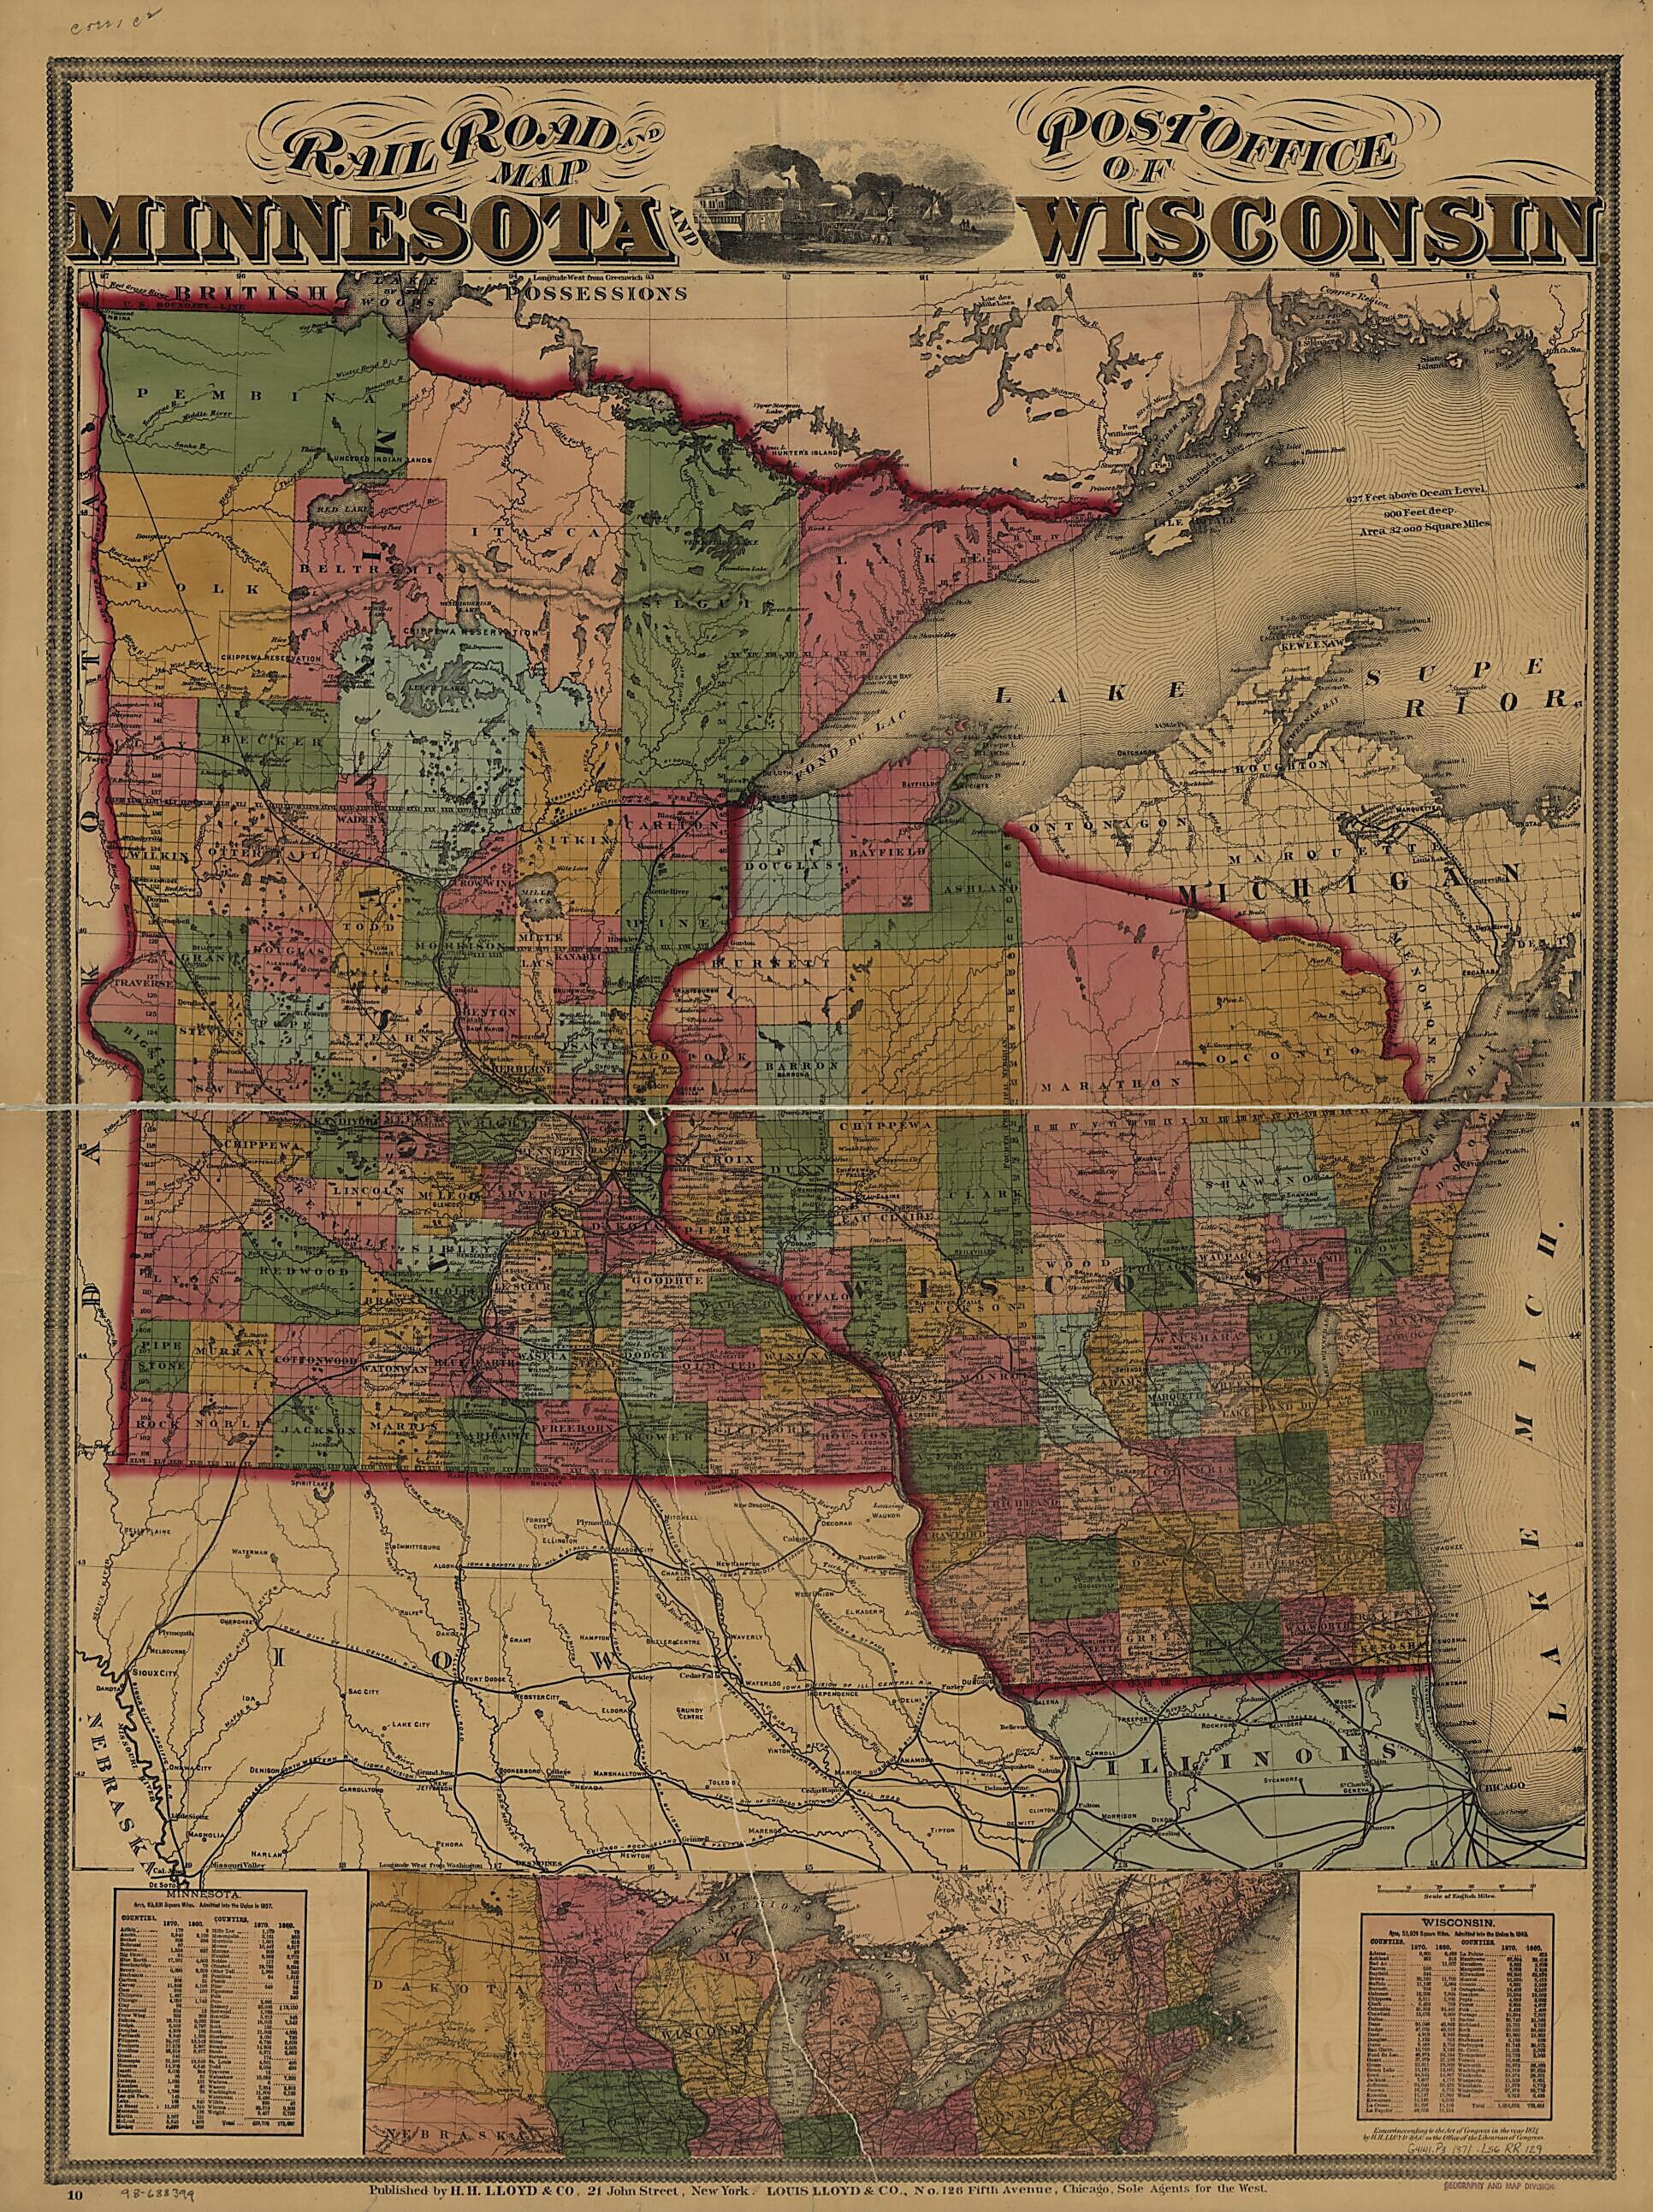 This old map of Railroad and Post Office Map of Minnesota and Wisconsin from 1871 was created by  H.H. Lloyd &amp; Co in 1871